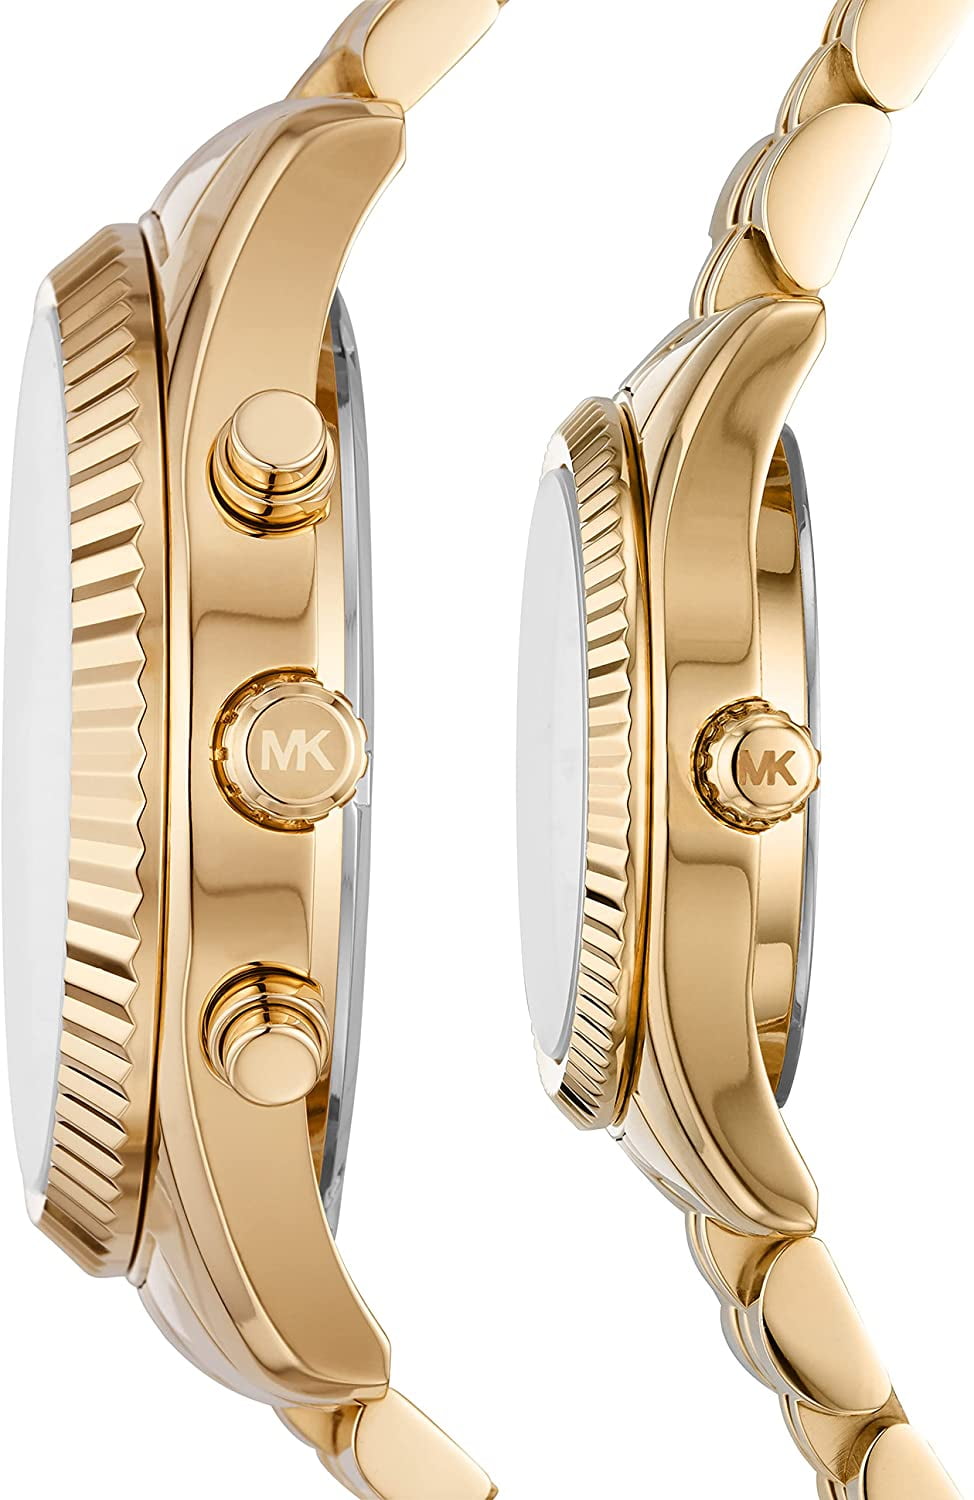 Michael Kors Michael Kors Jaryn his and hers Watch Gift Set SALE   Own4Less